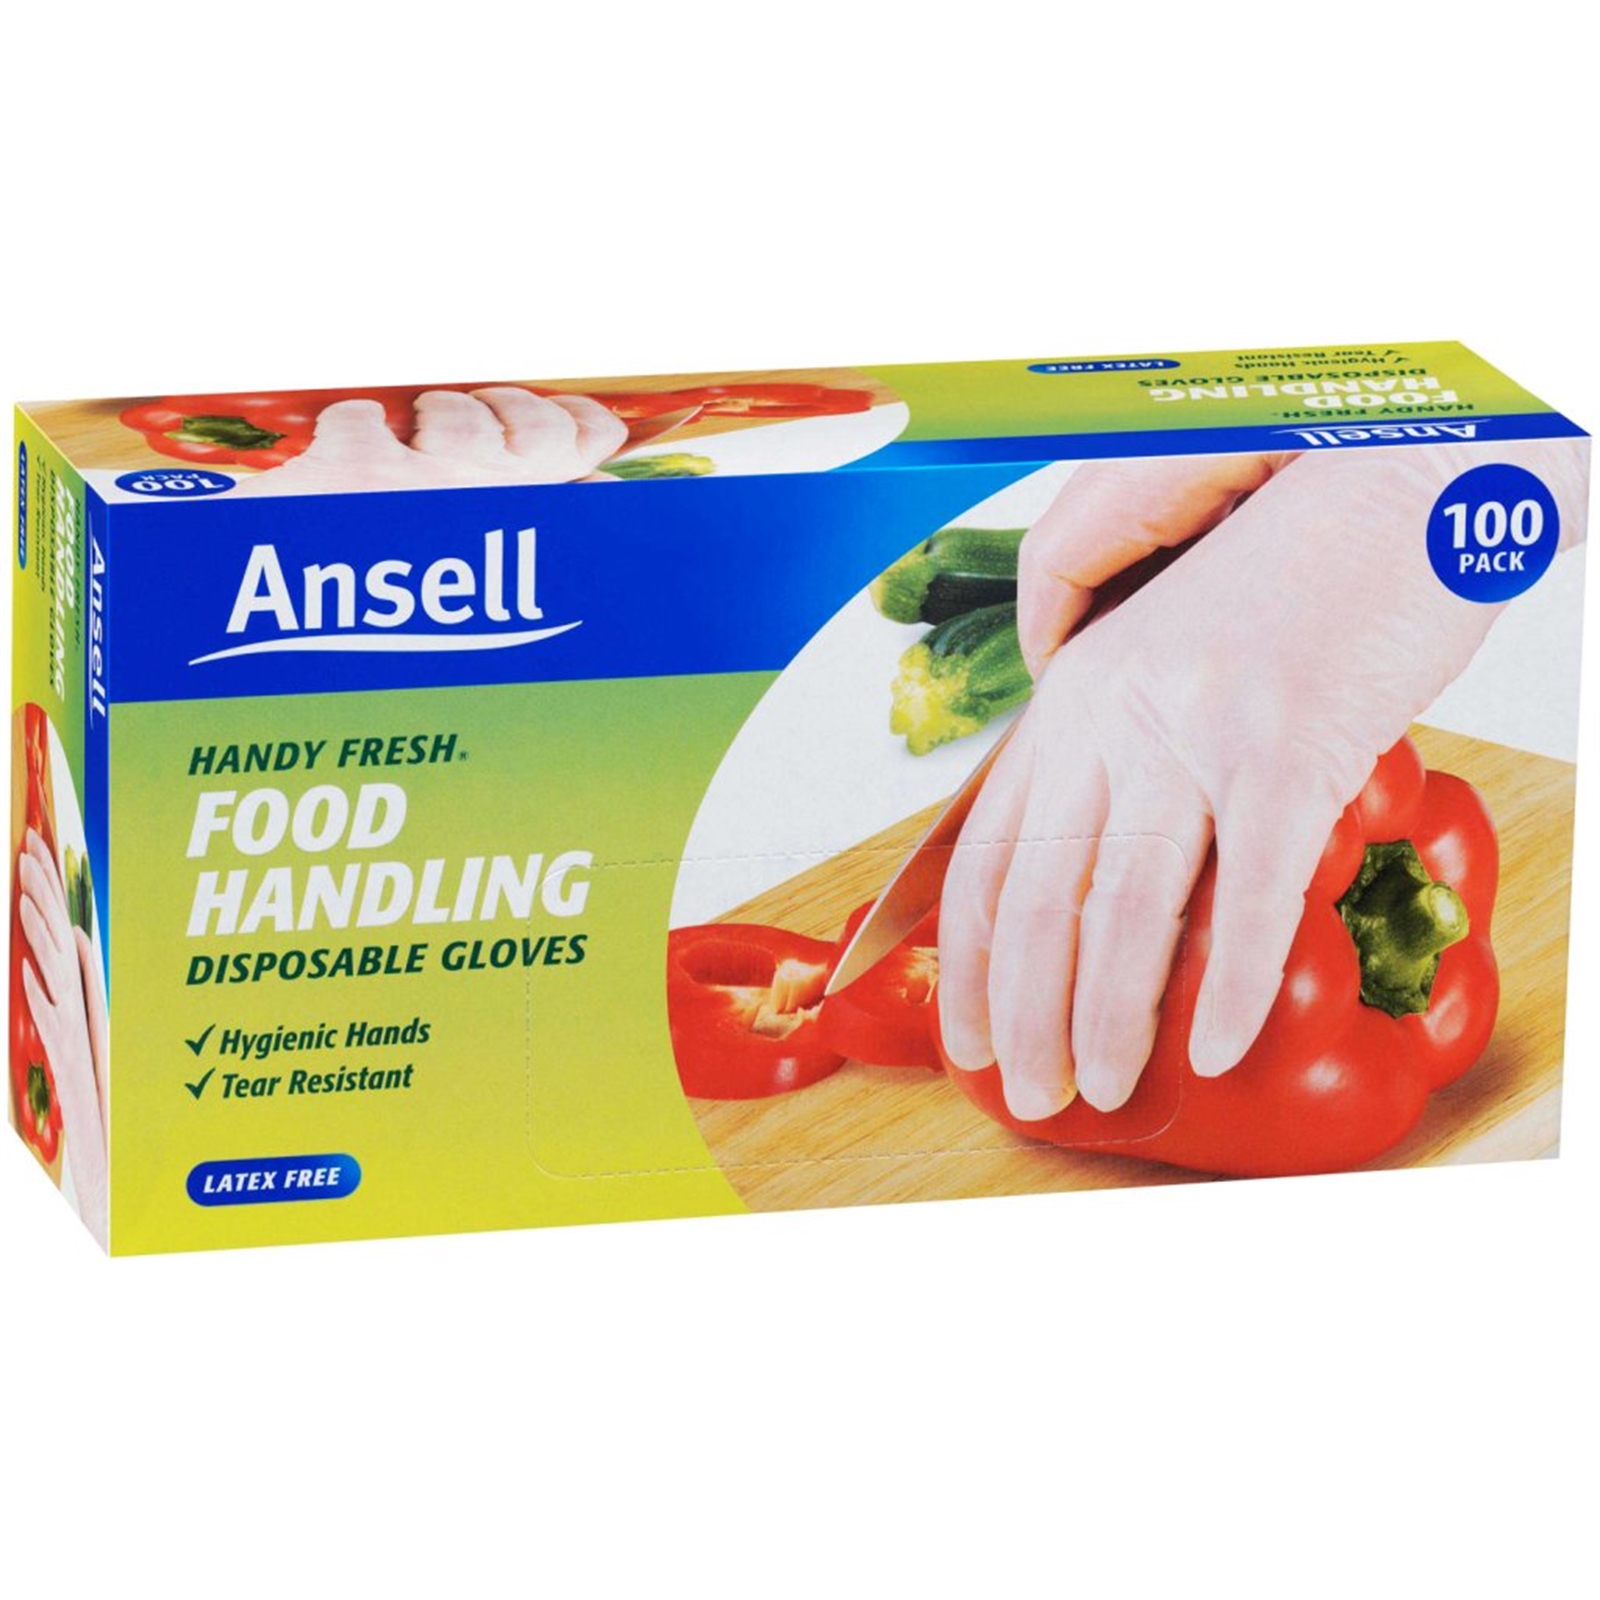 Ansell Handy Fresh Disposable Gloves - 100 Pack